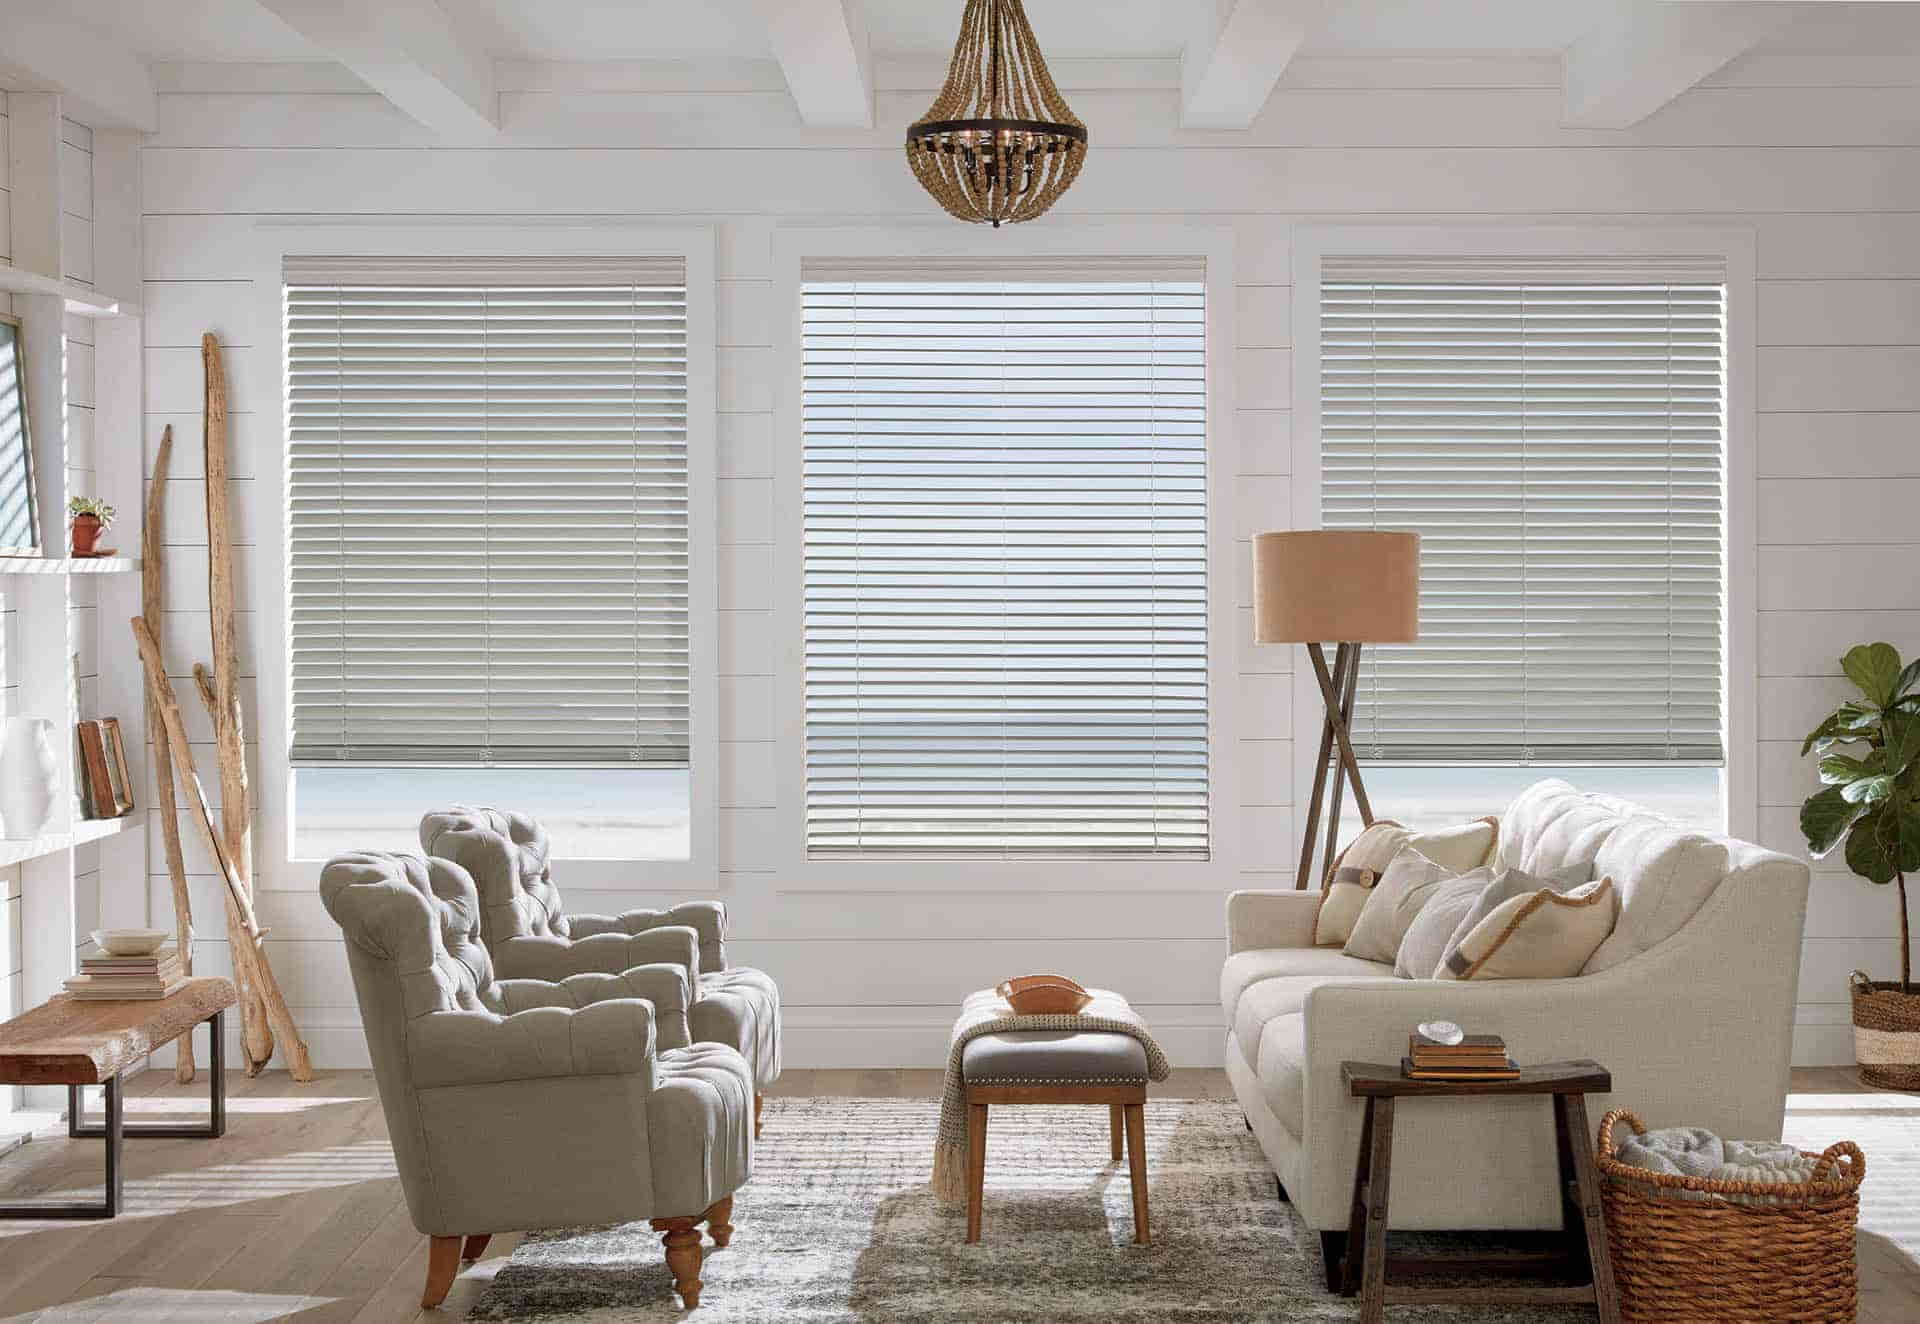 5 Benefits of Installing Blinds in Your Home